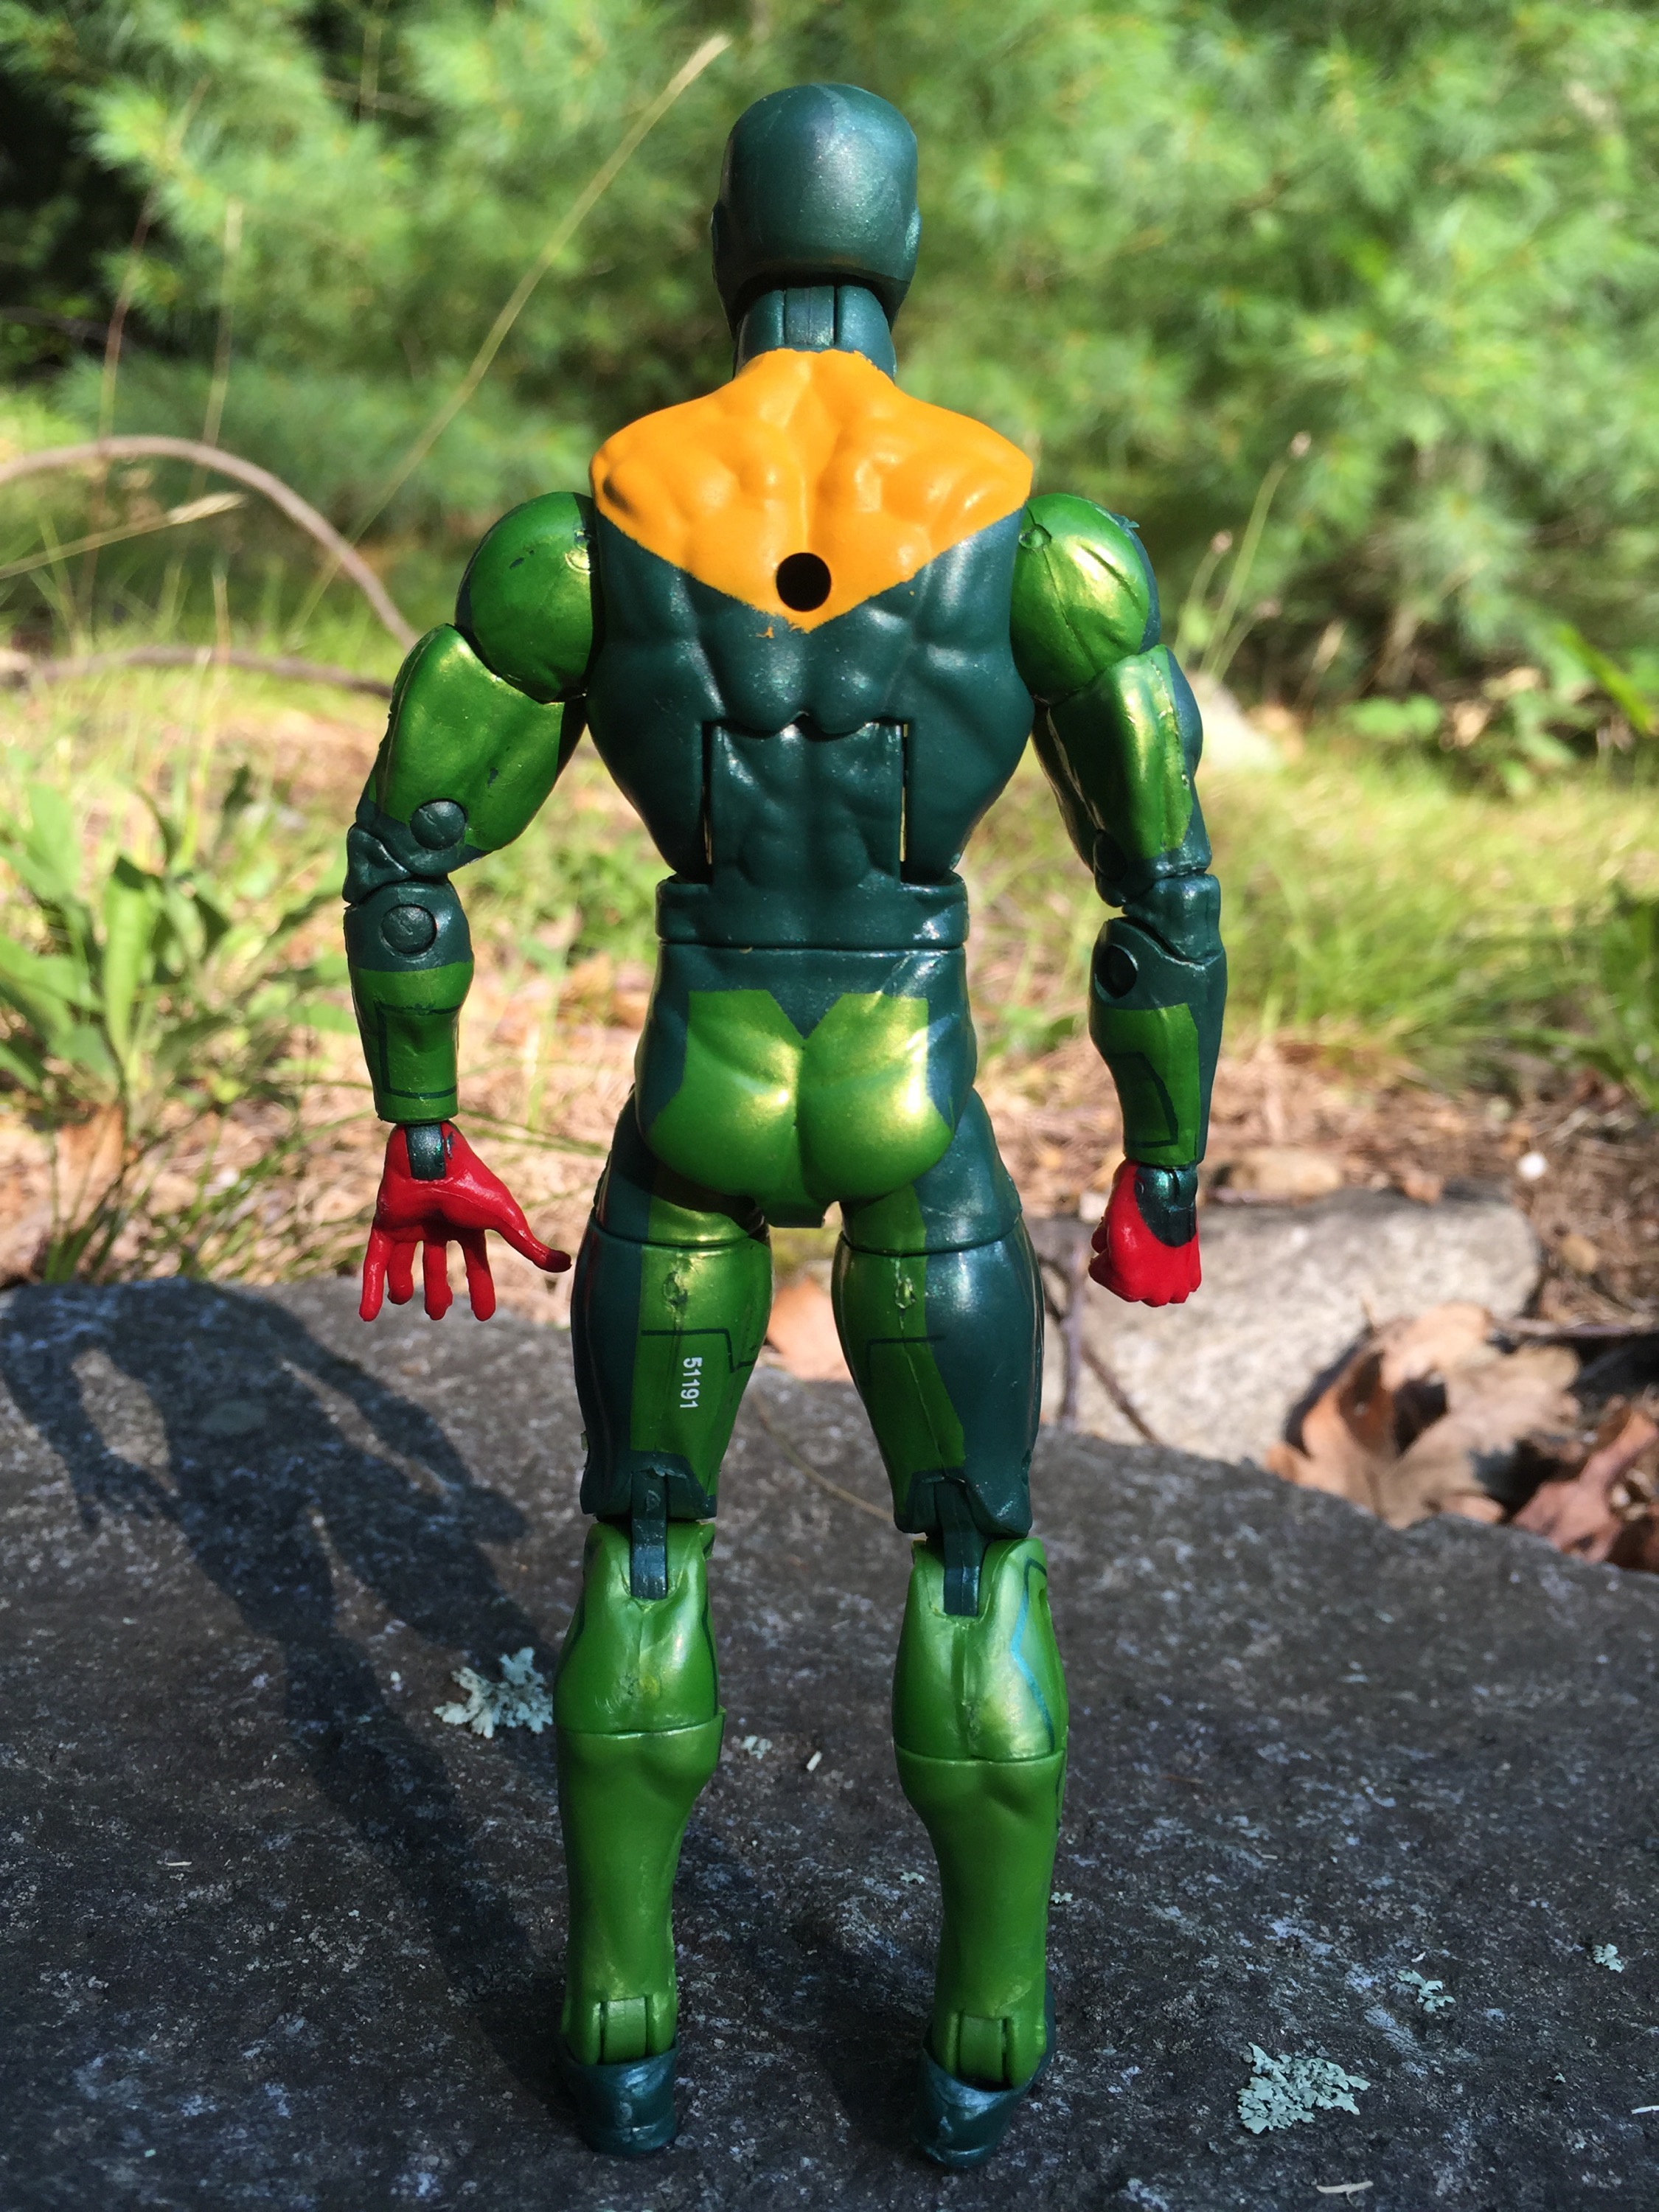 Marvel Legends Vision Review & Photos (Hulkbuster Series